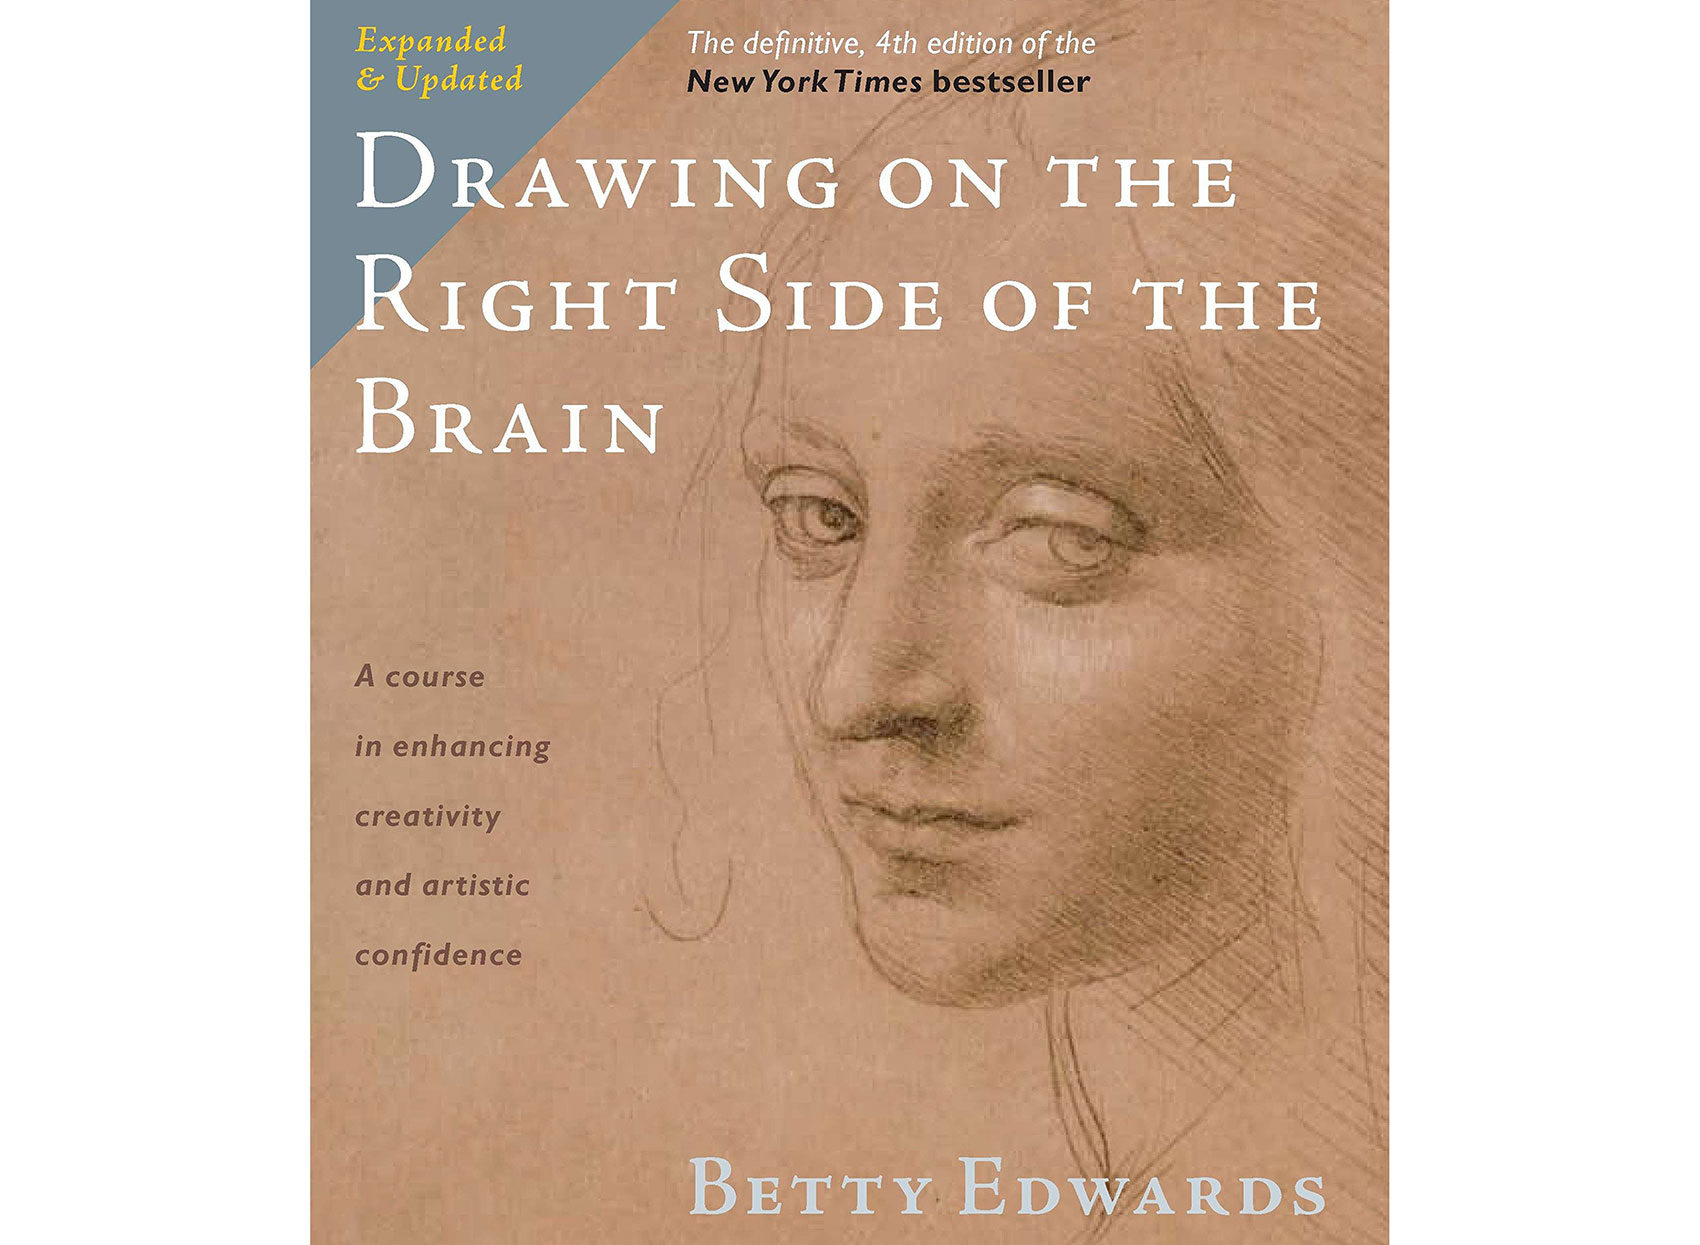 Best drawing books: Drawing on the right side of the brain